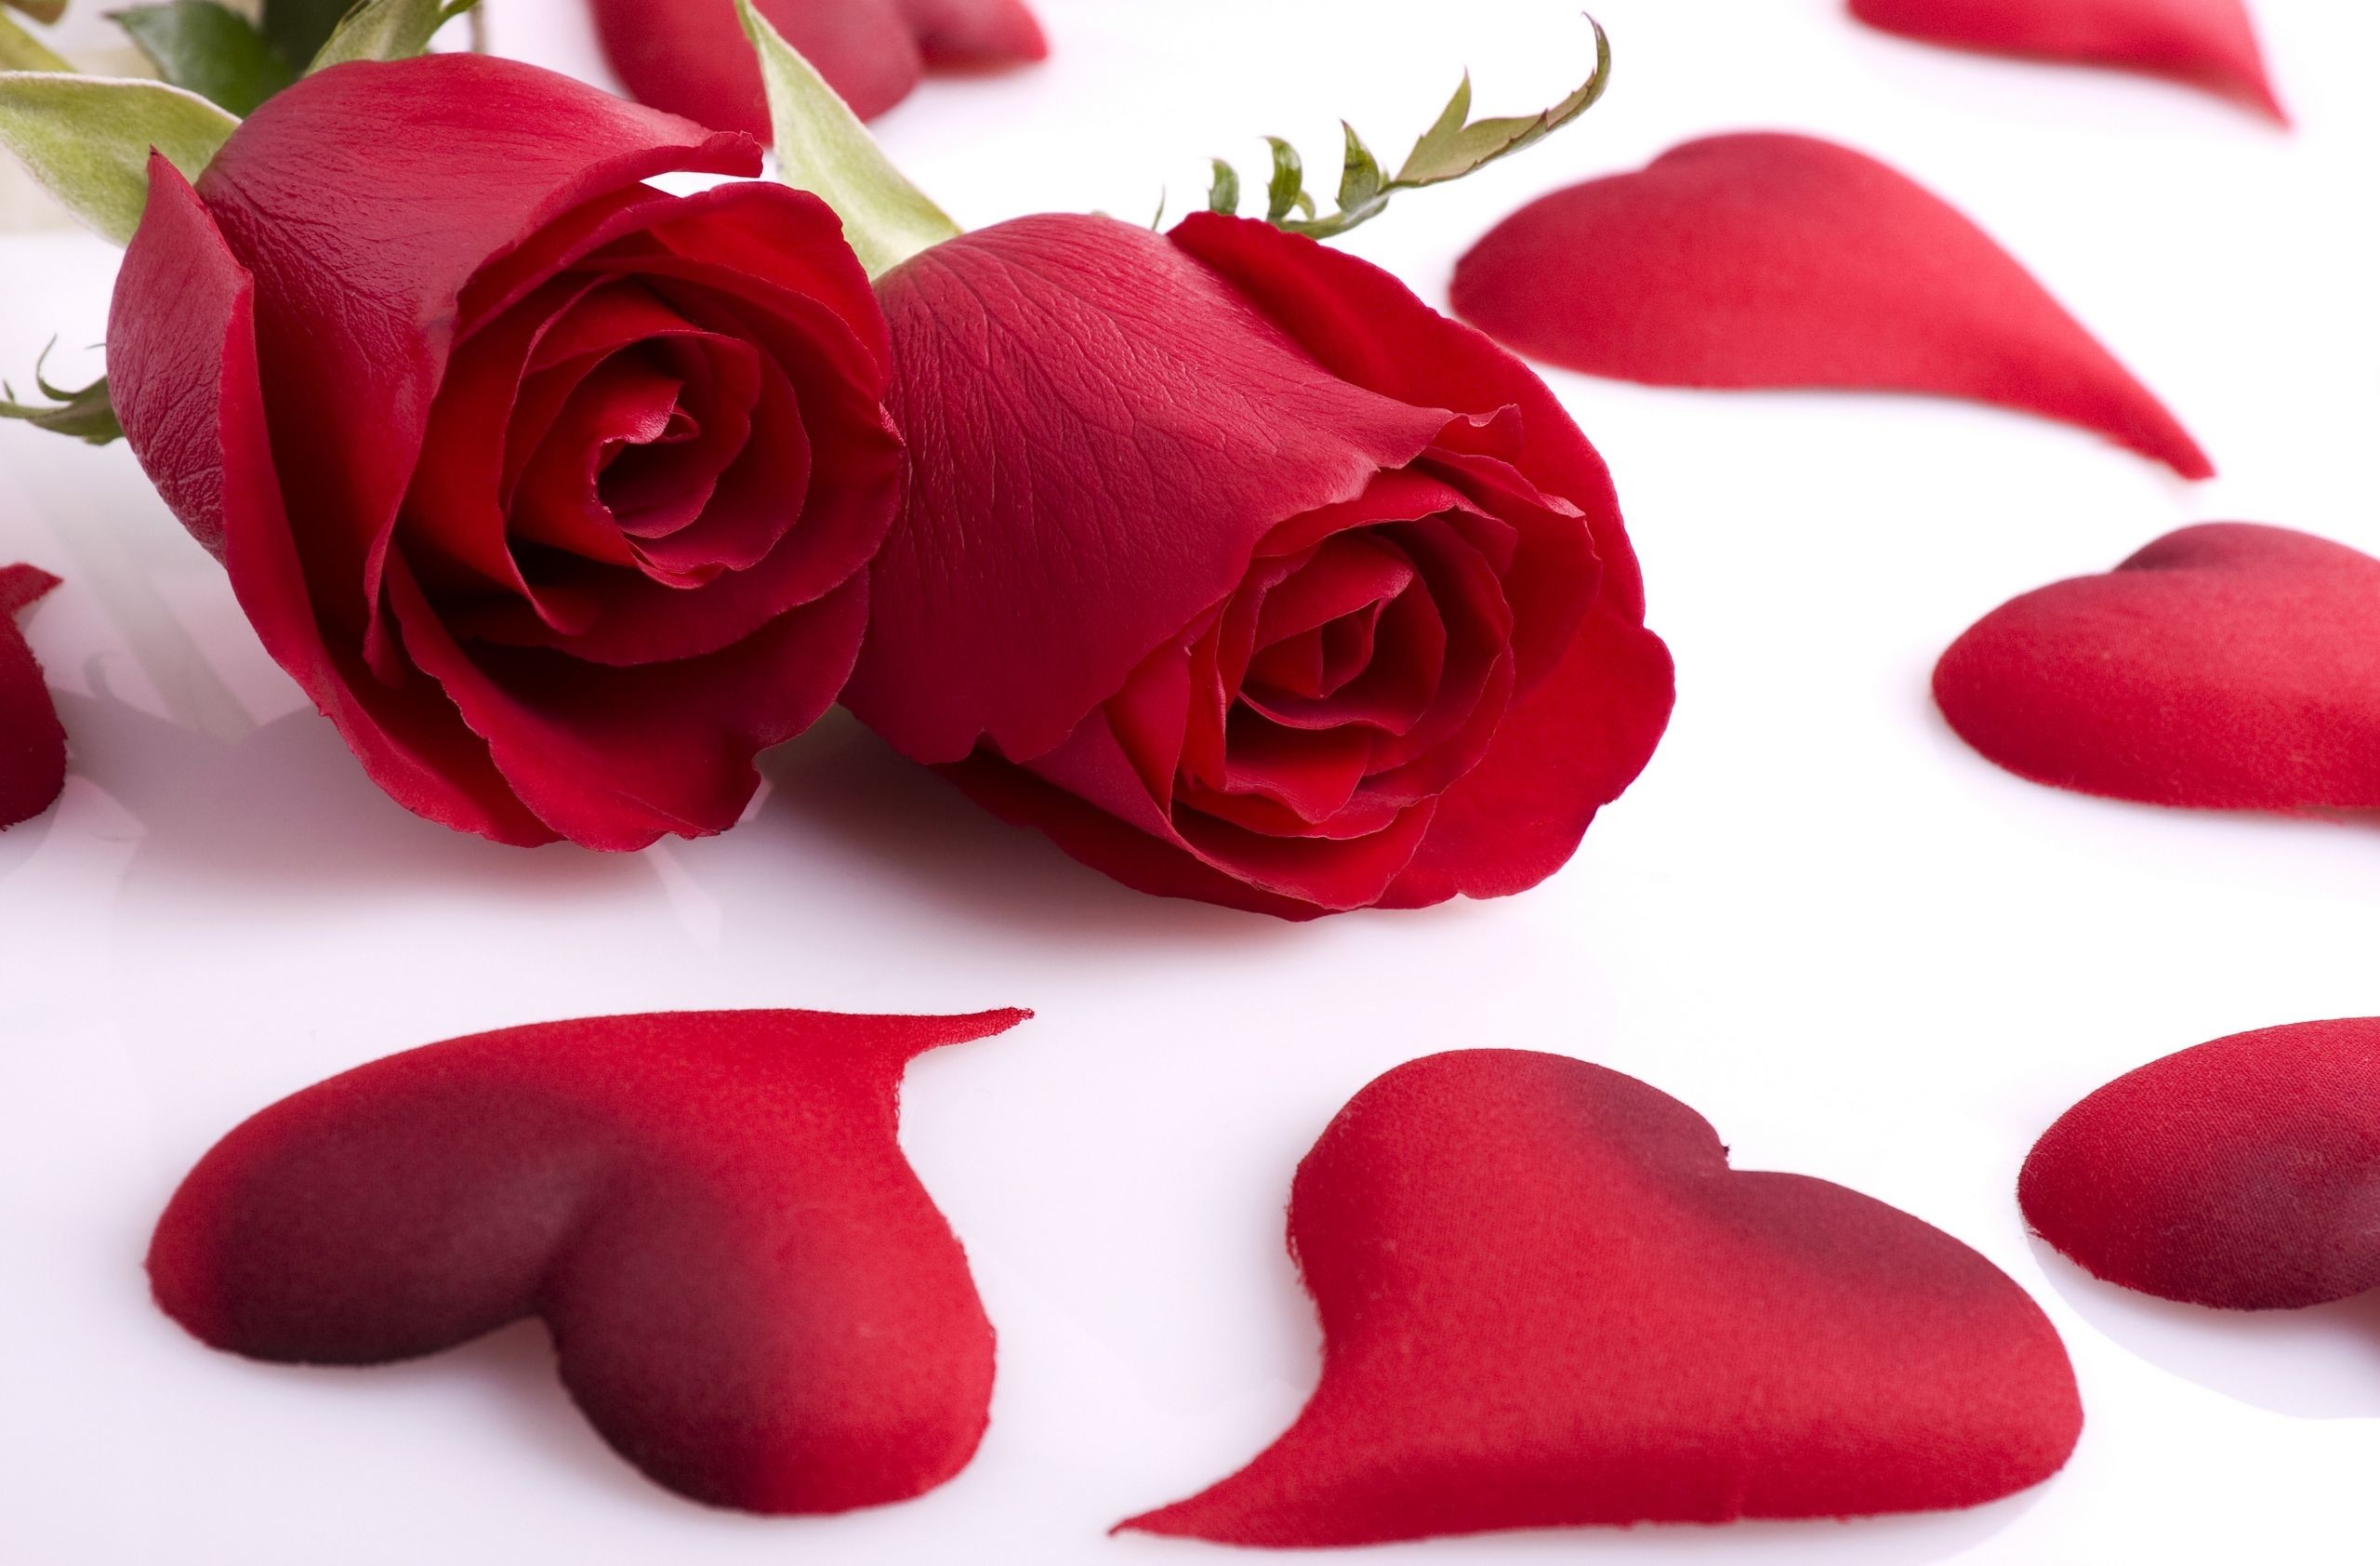 10 Beautiful Rose Wallpapers For Desktop, Android, Mobile